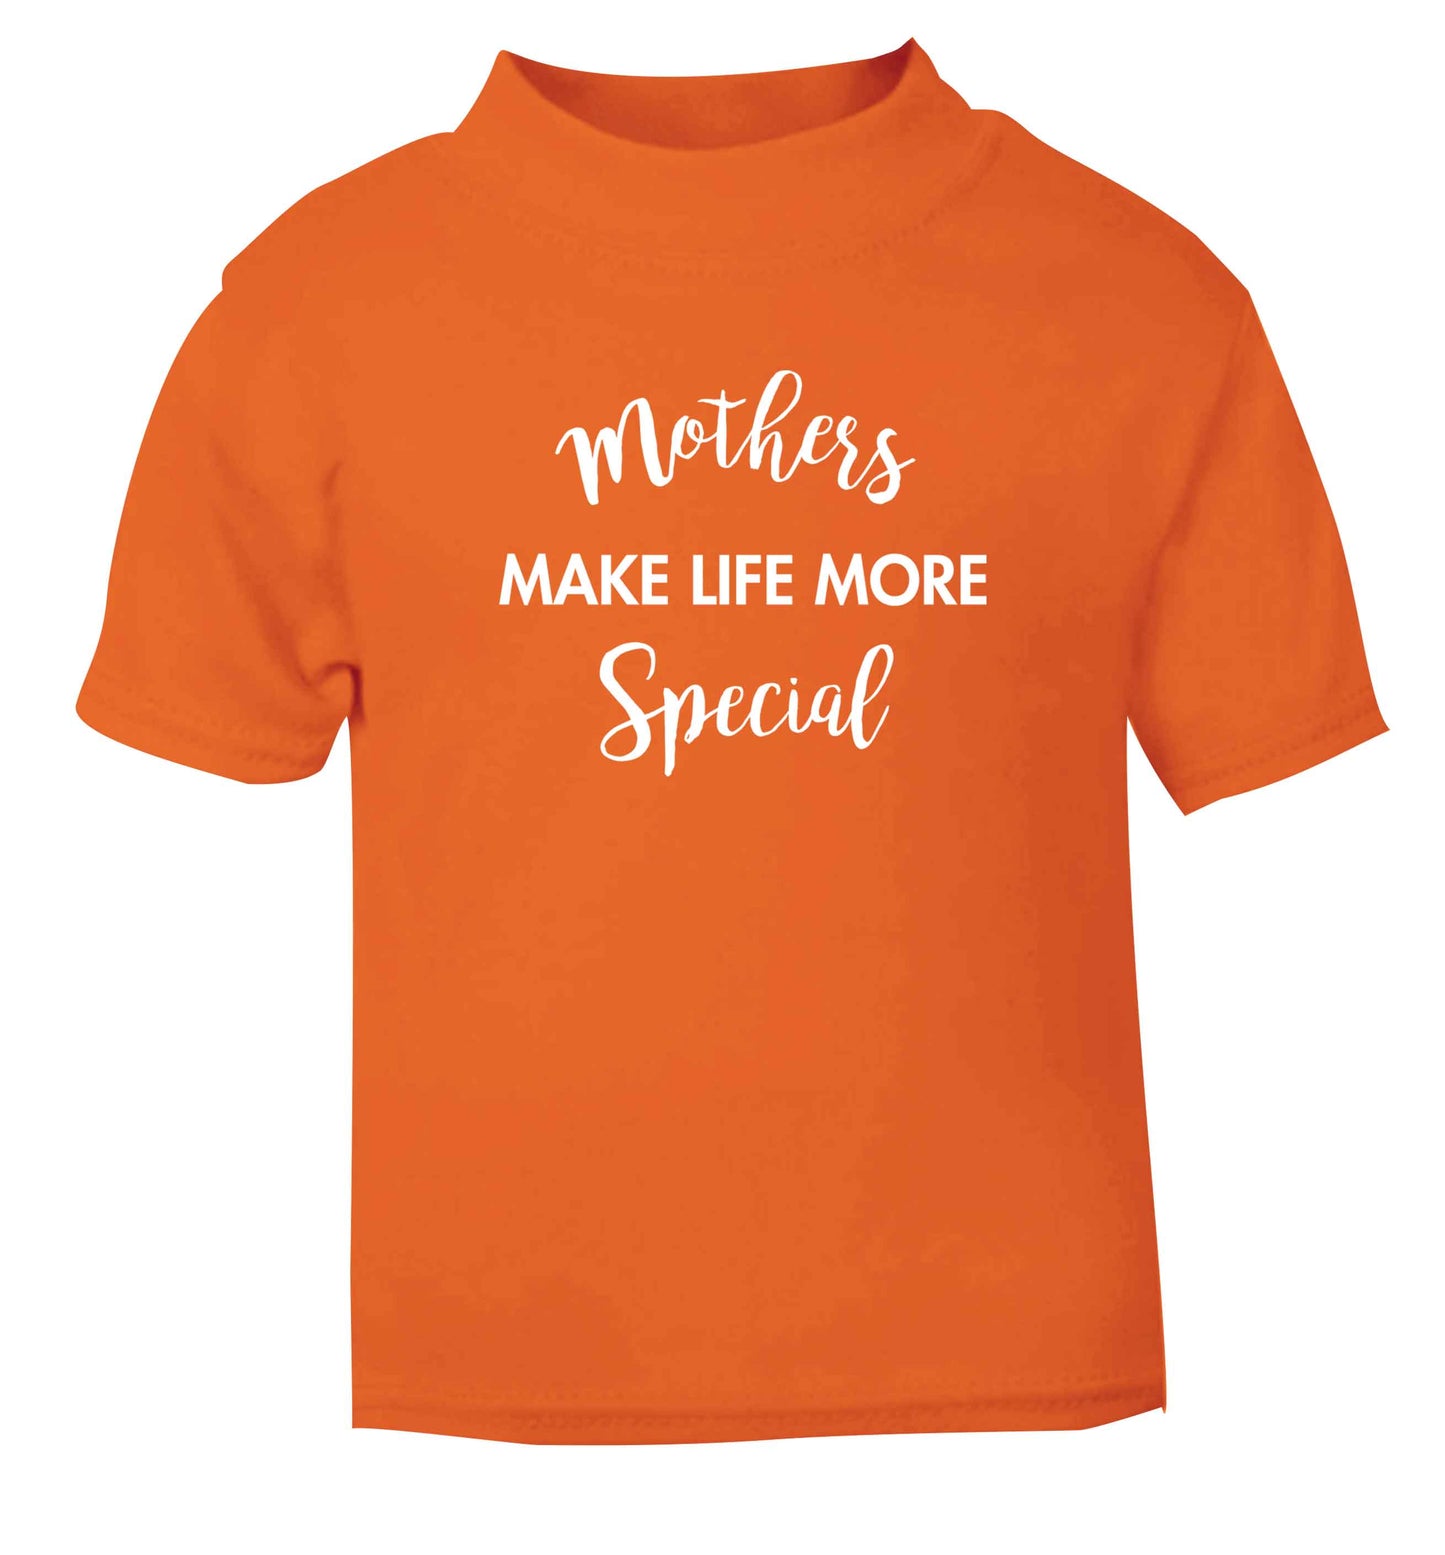 Mother's make life more special orange baby toddler Tshirt 2 Years